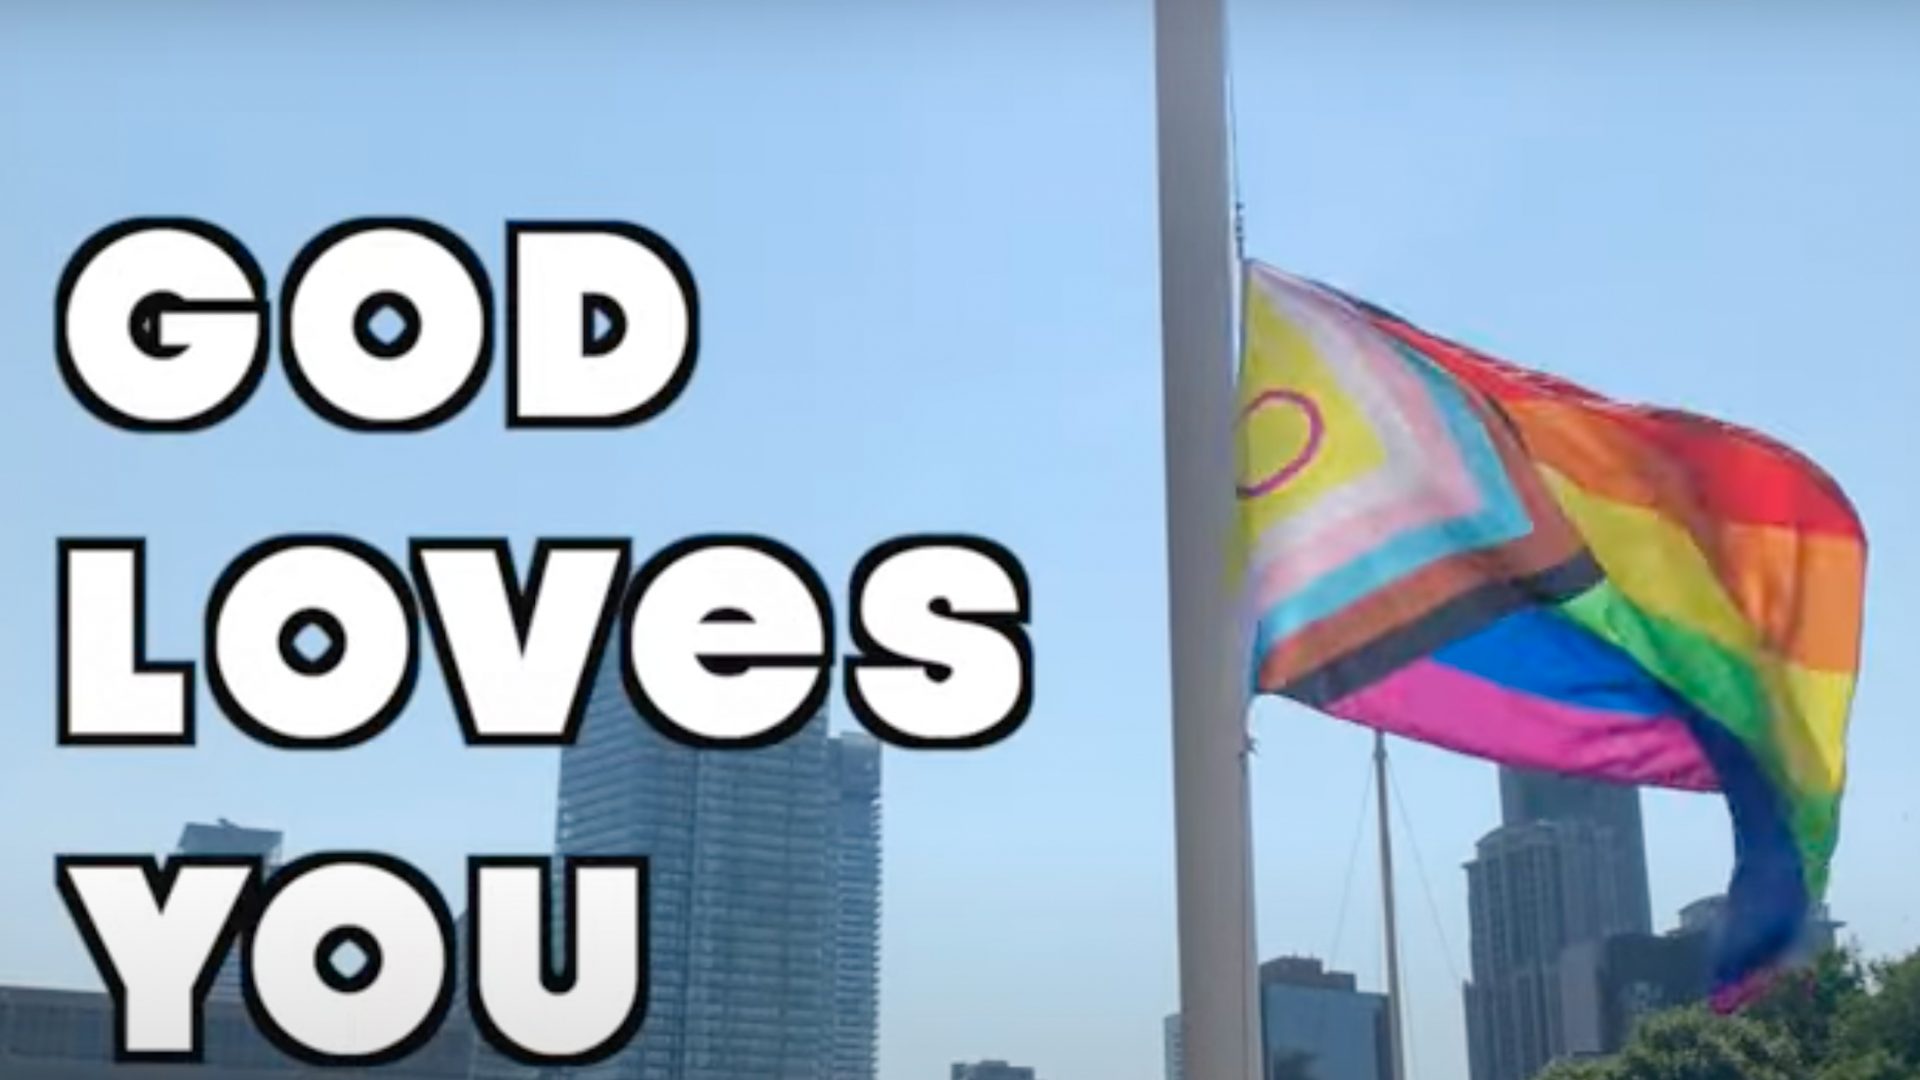 A pride flag flies in the background. White text next to it that says "God Loves You"